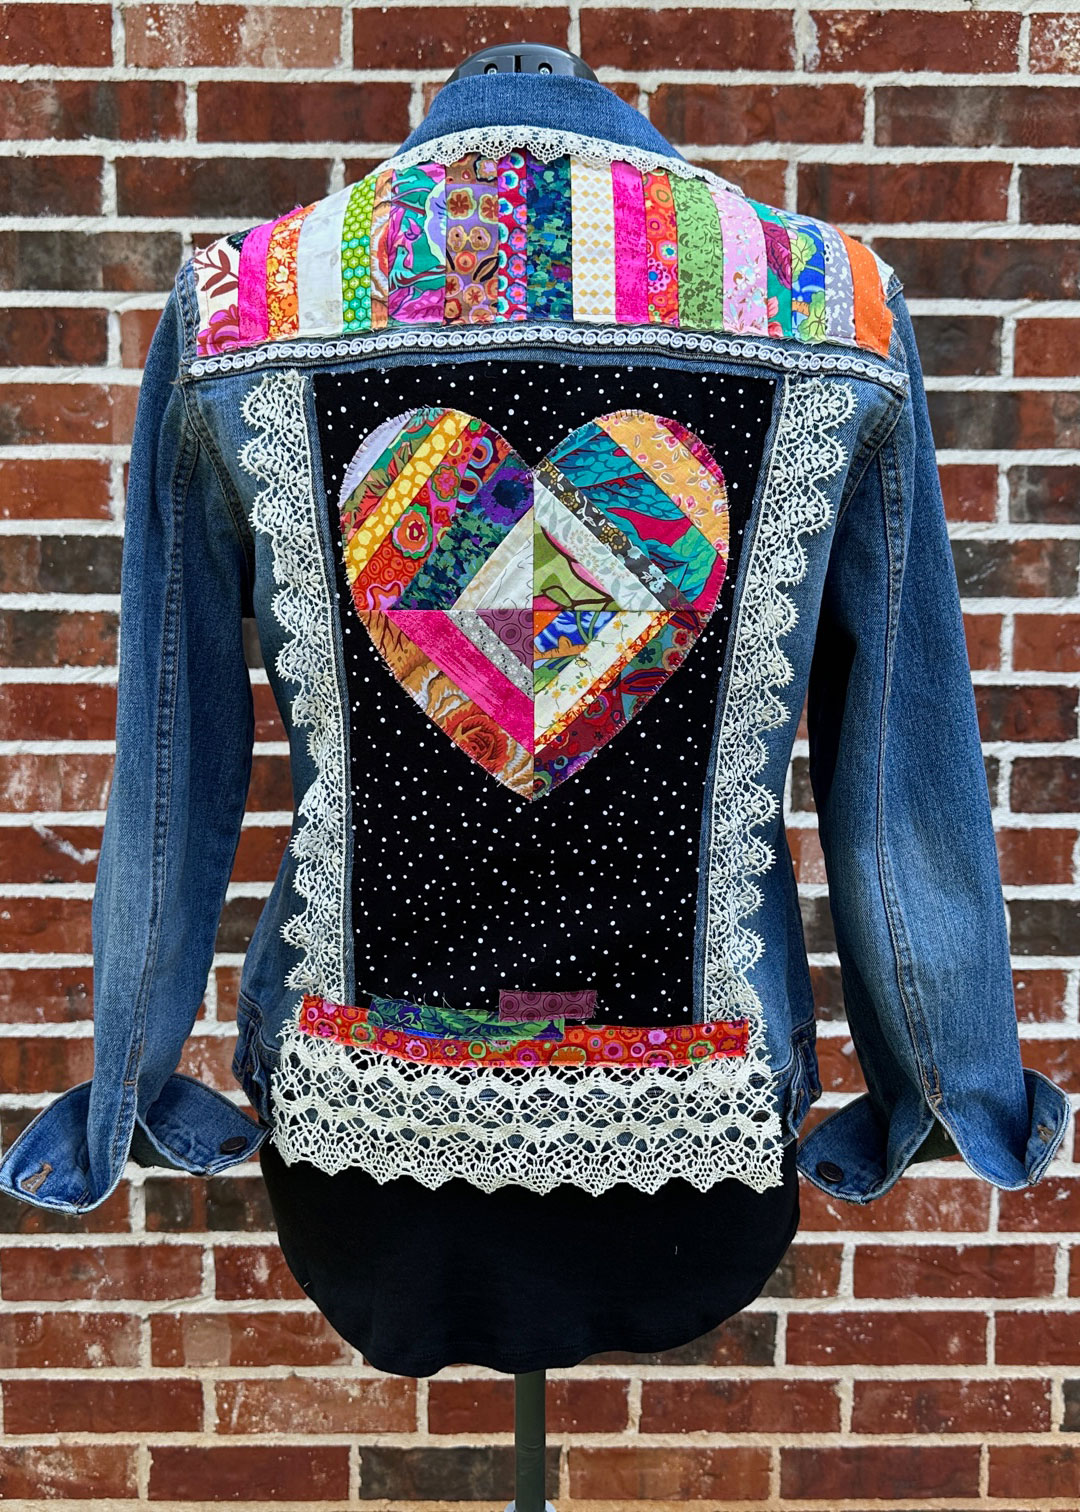 Spring upcycle: How to make an applique jean jacket - Elizabeth Made This